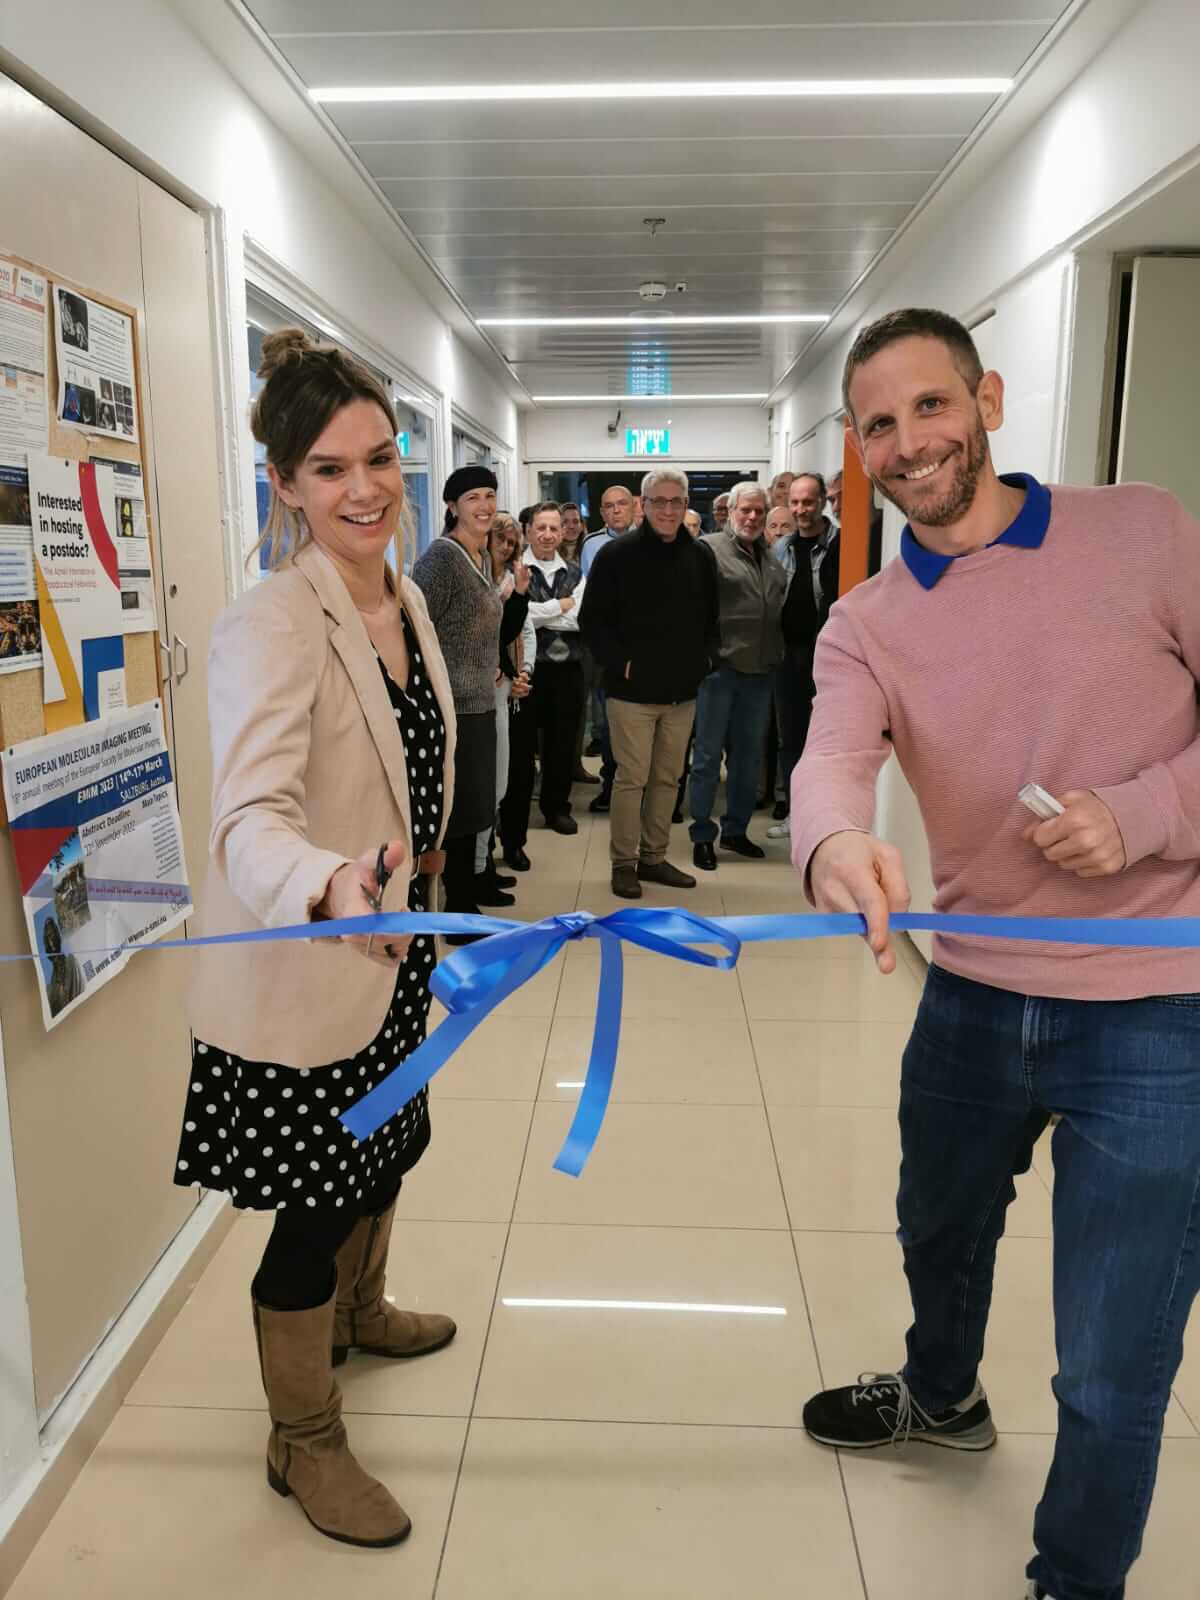 Congratulations to Dr. Katrien Vandoorne and Dr. Hemi Rotenberg for the new lab opening